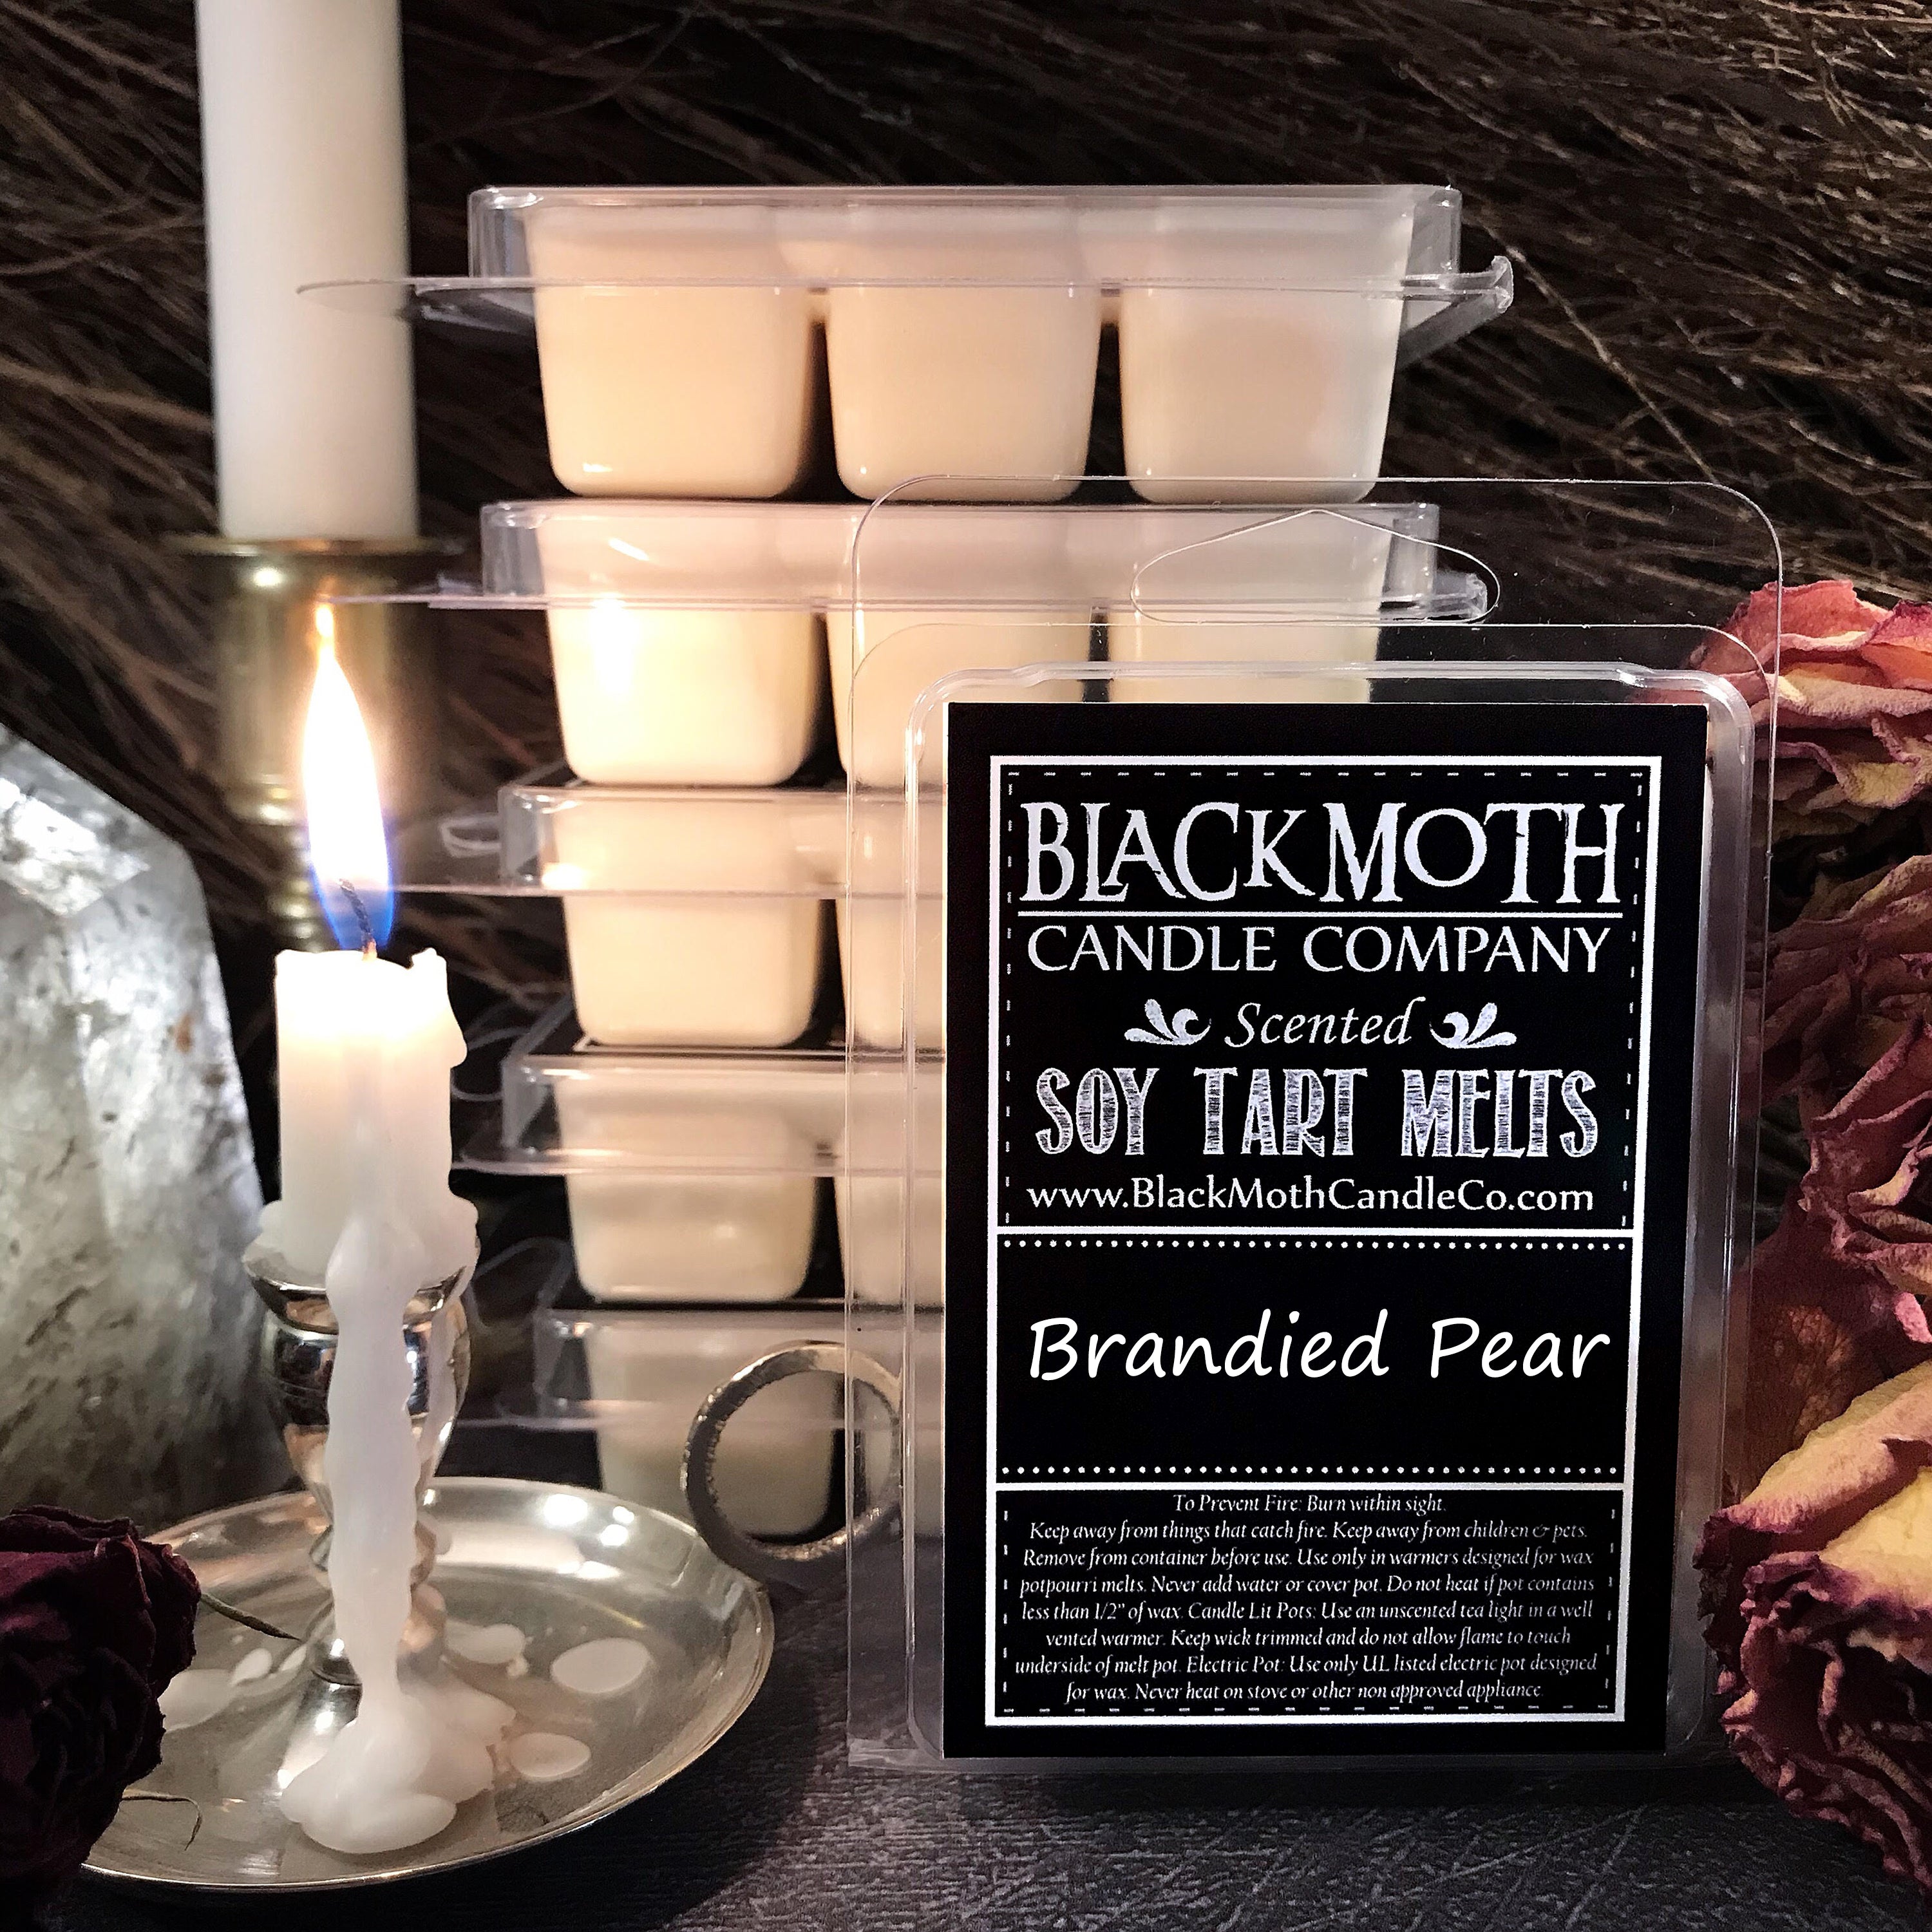 Brandied Pear Scented Soy Wax Melts